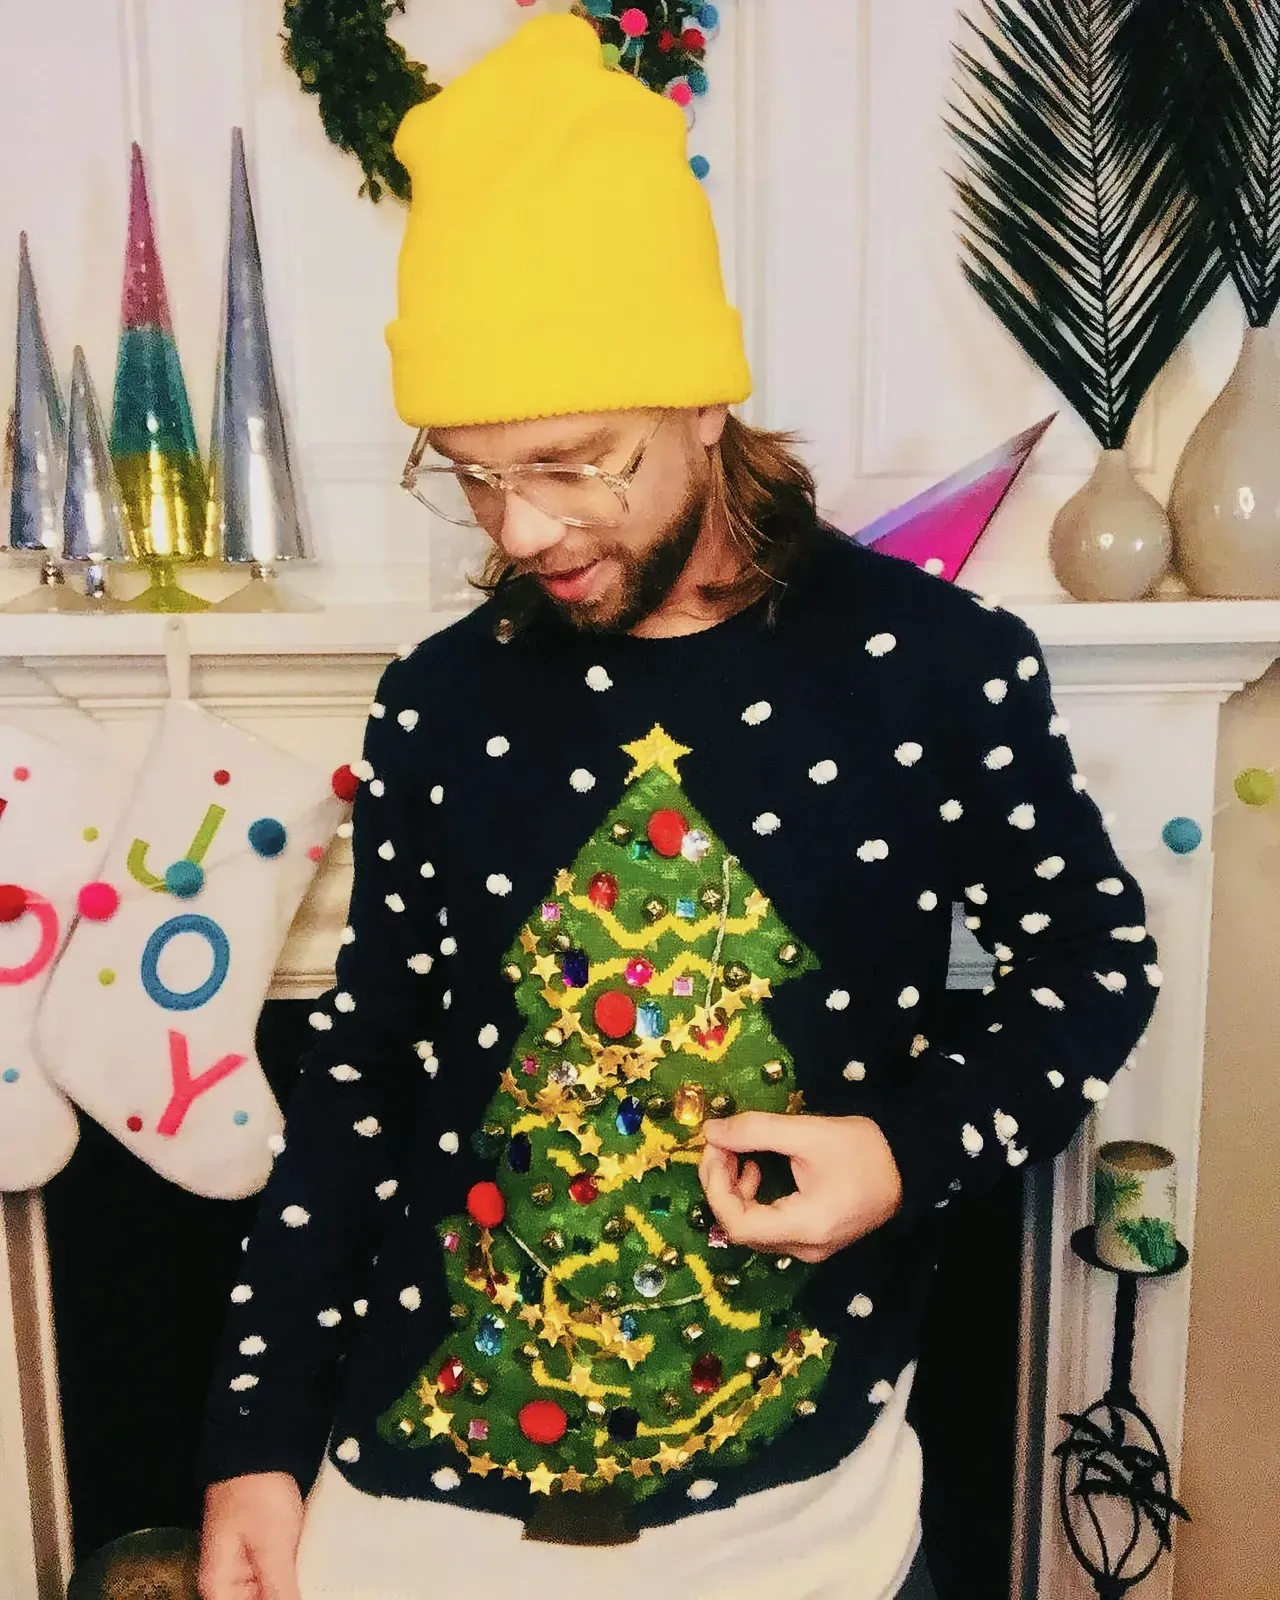 Man wearing a DIY ugly Christmas sweater and yellow hat with pom-poms in a festive indoor setting with a Christmas tree and decorations.